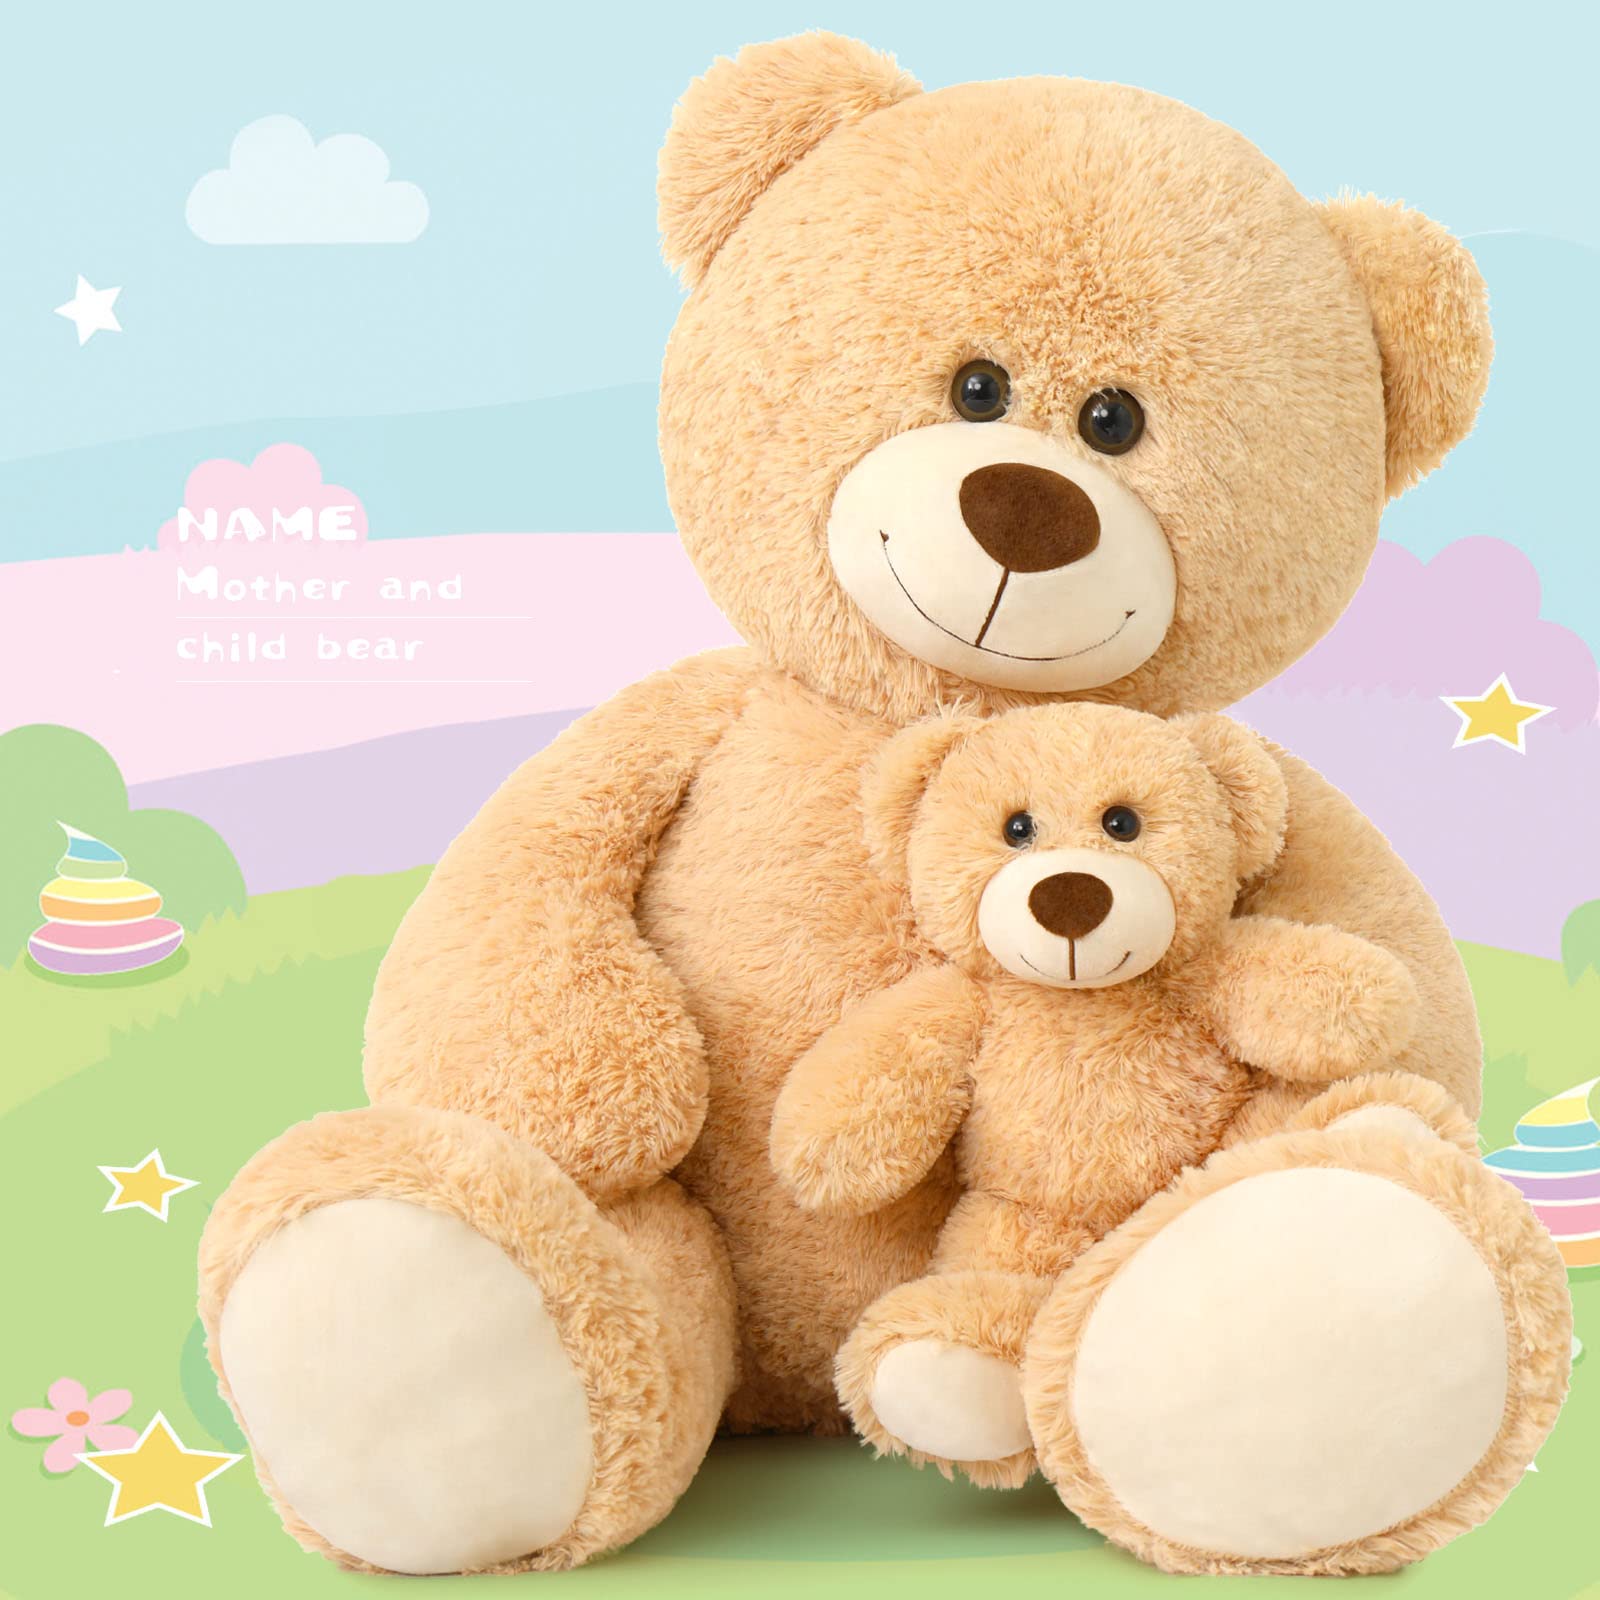 Muiteiur Giant Teddy Bear Stuffed Animal Cute Mommy and Baby Bear Teddy Bear Baby Shower Plush Toy for Kids Boys Girls Great Gift for Christmas Valentines Day Party Decorations 40inch,Light Brown